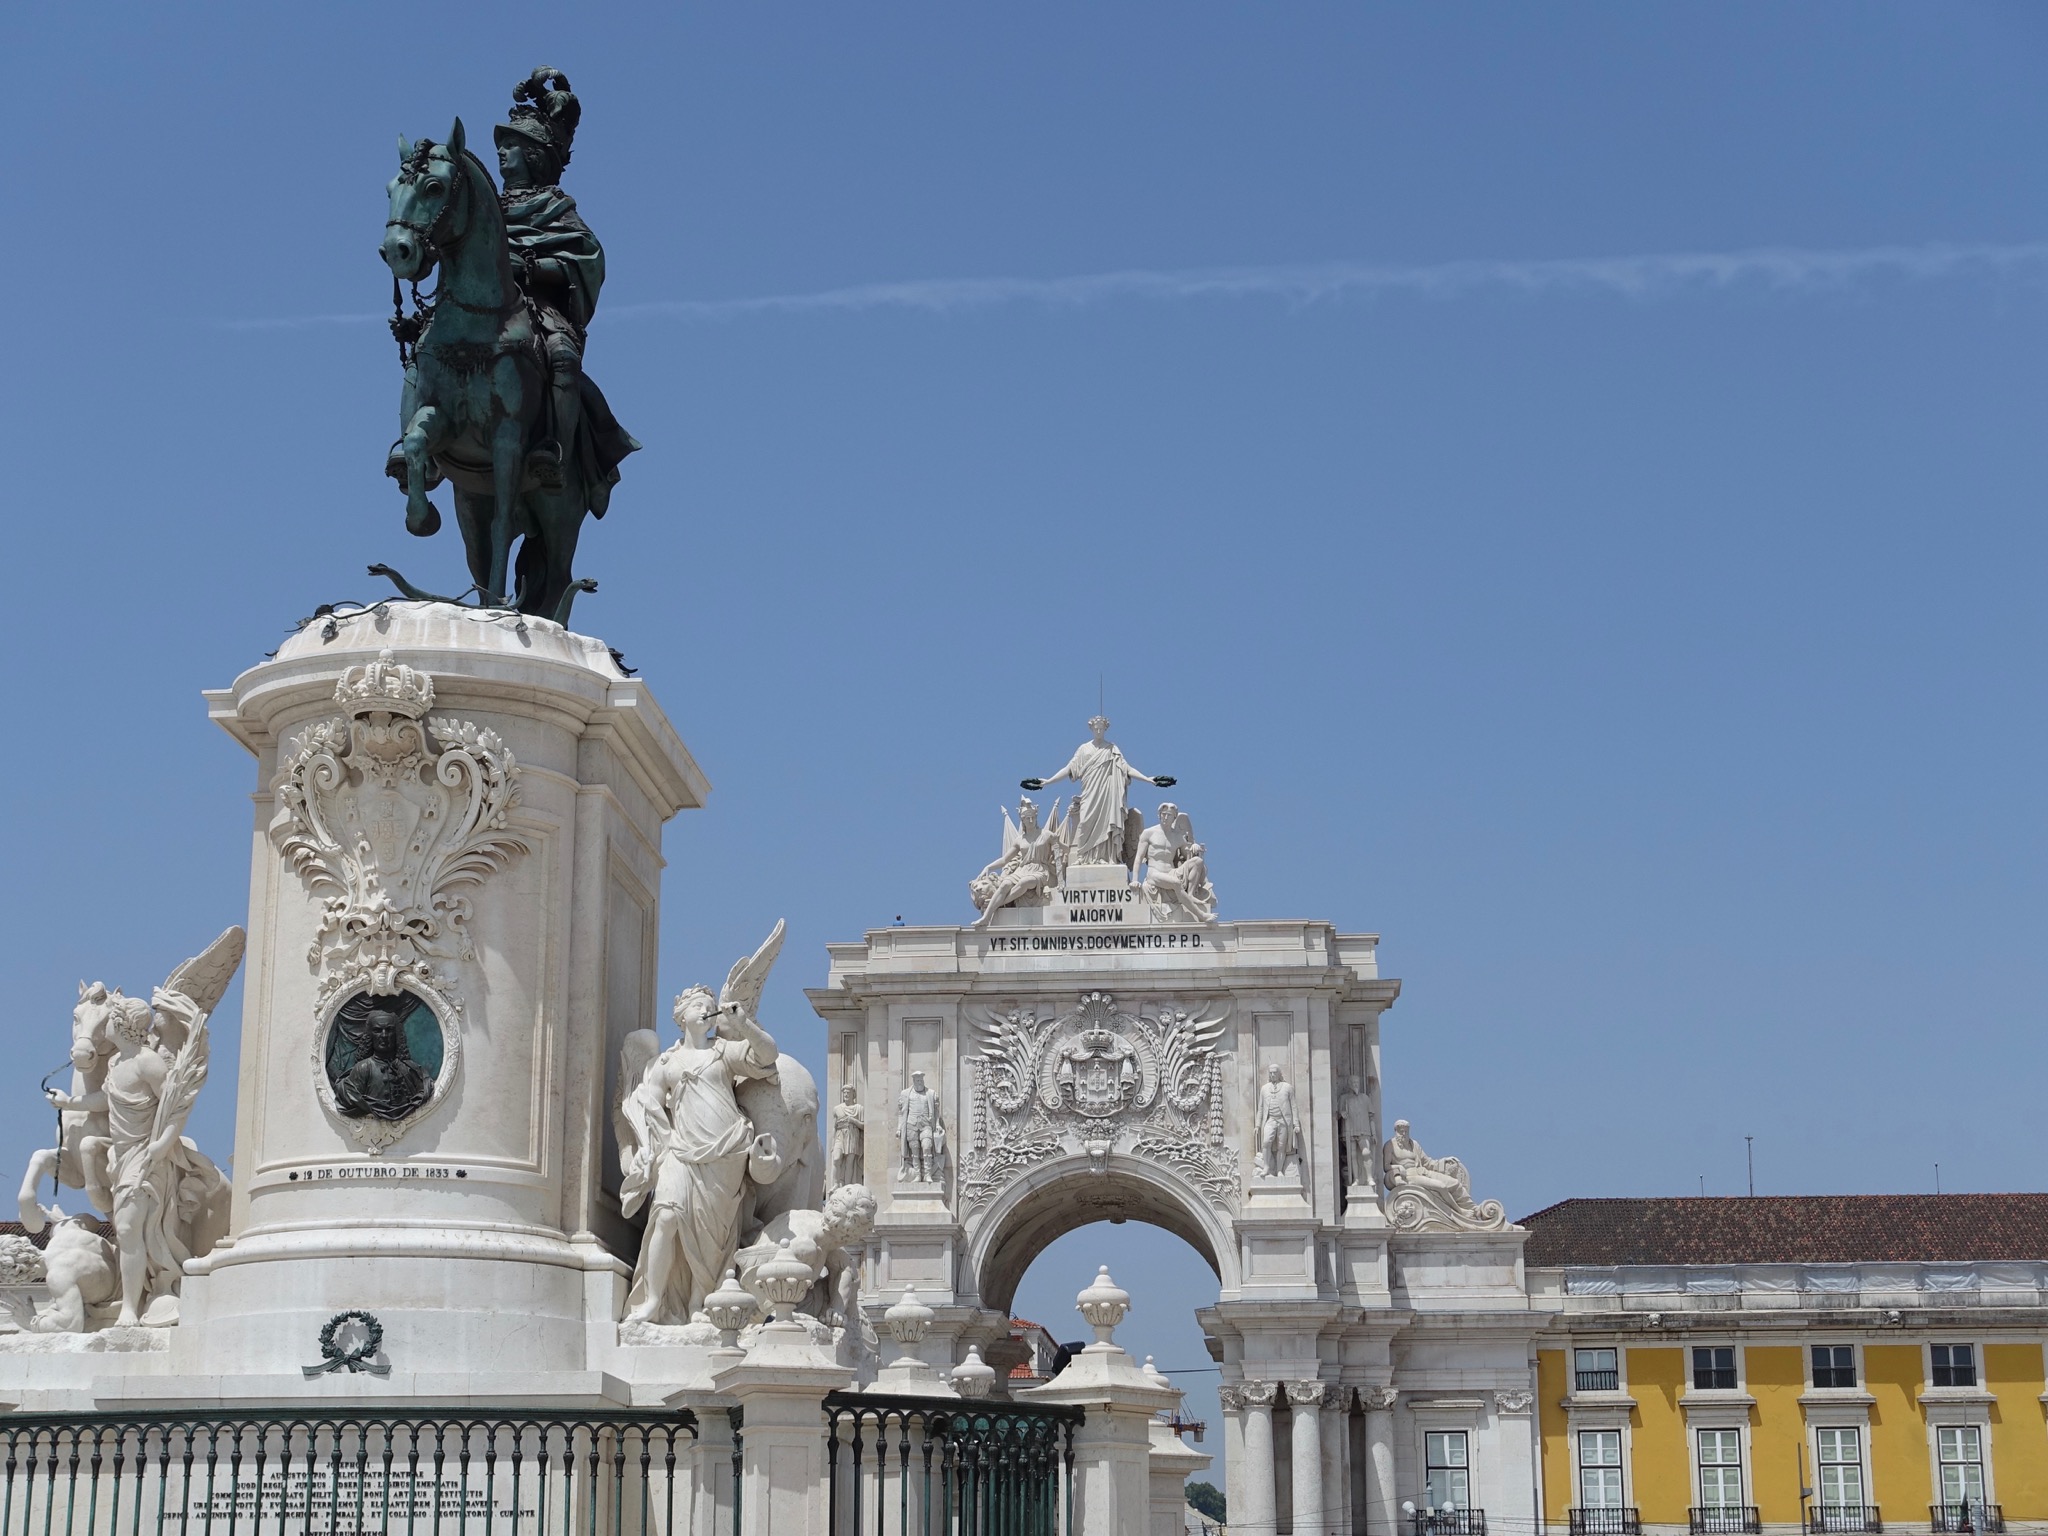 Photo 50 of 86 from the album Highlights Lisbon 2015.